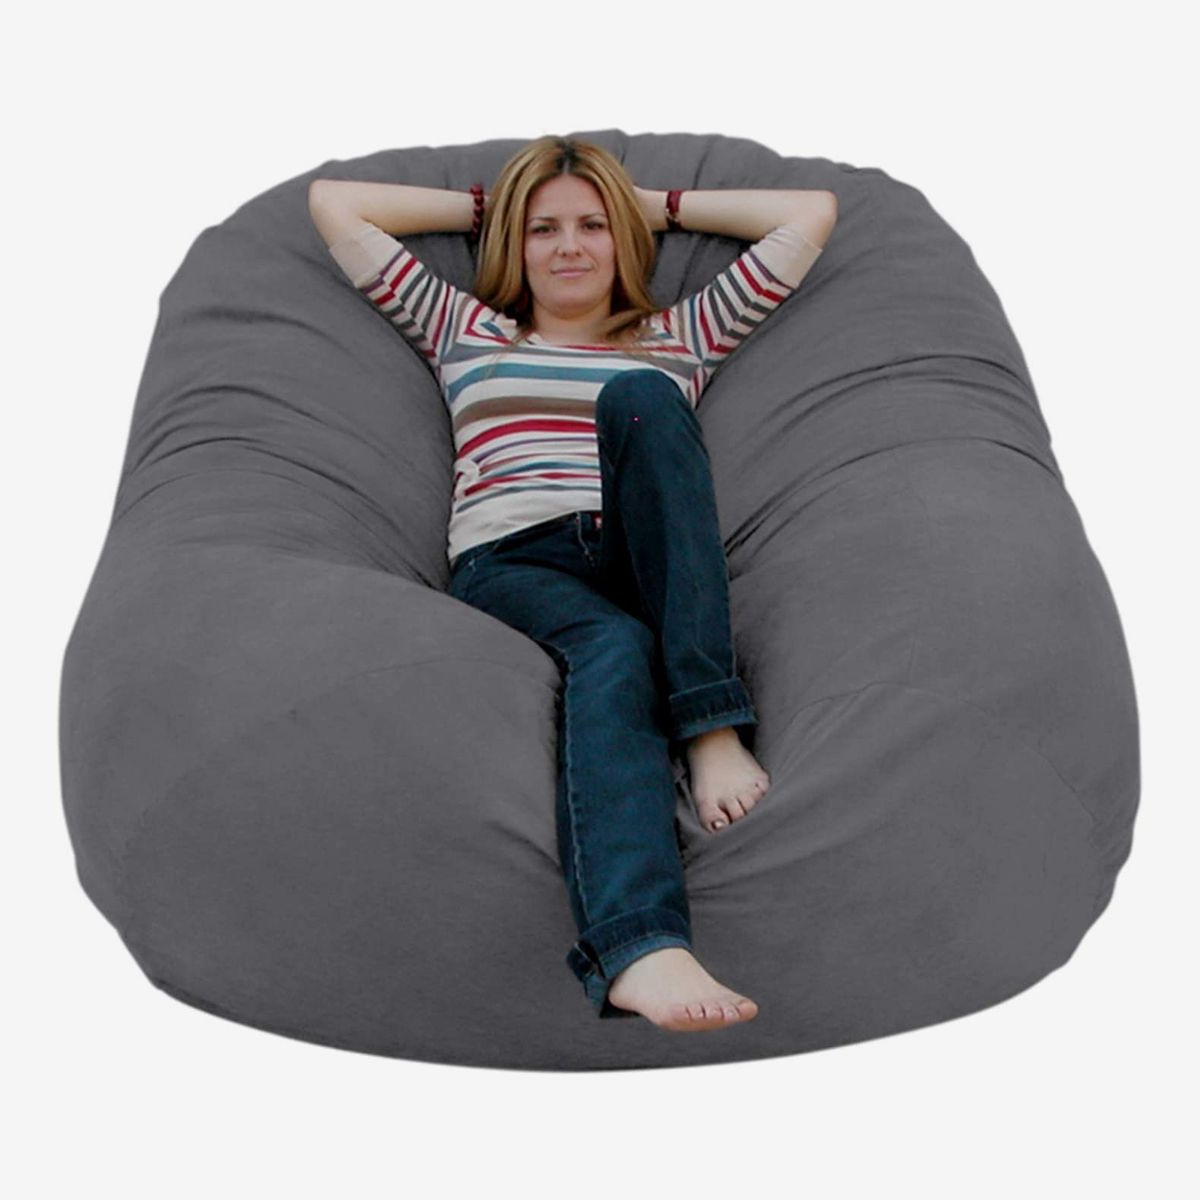 Cheap Bean Bag Chairs For Adults - Chill Sack 6 Ft Large Bean Bag